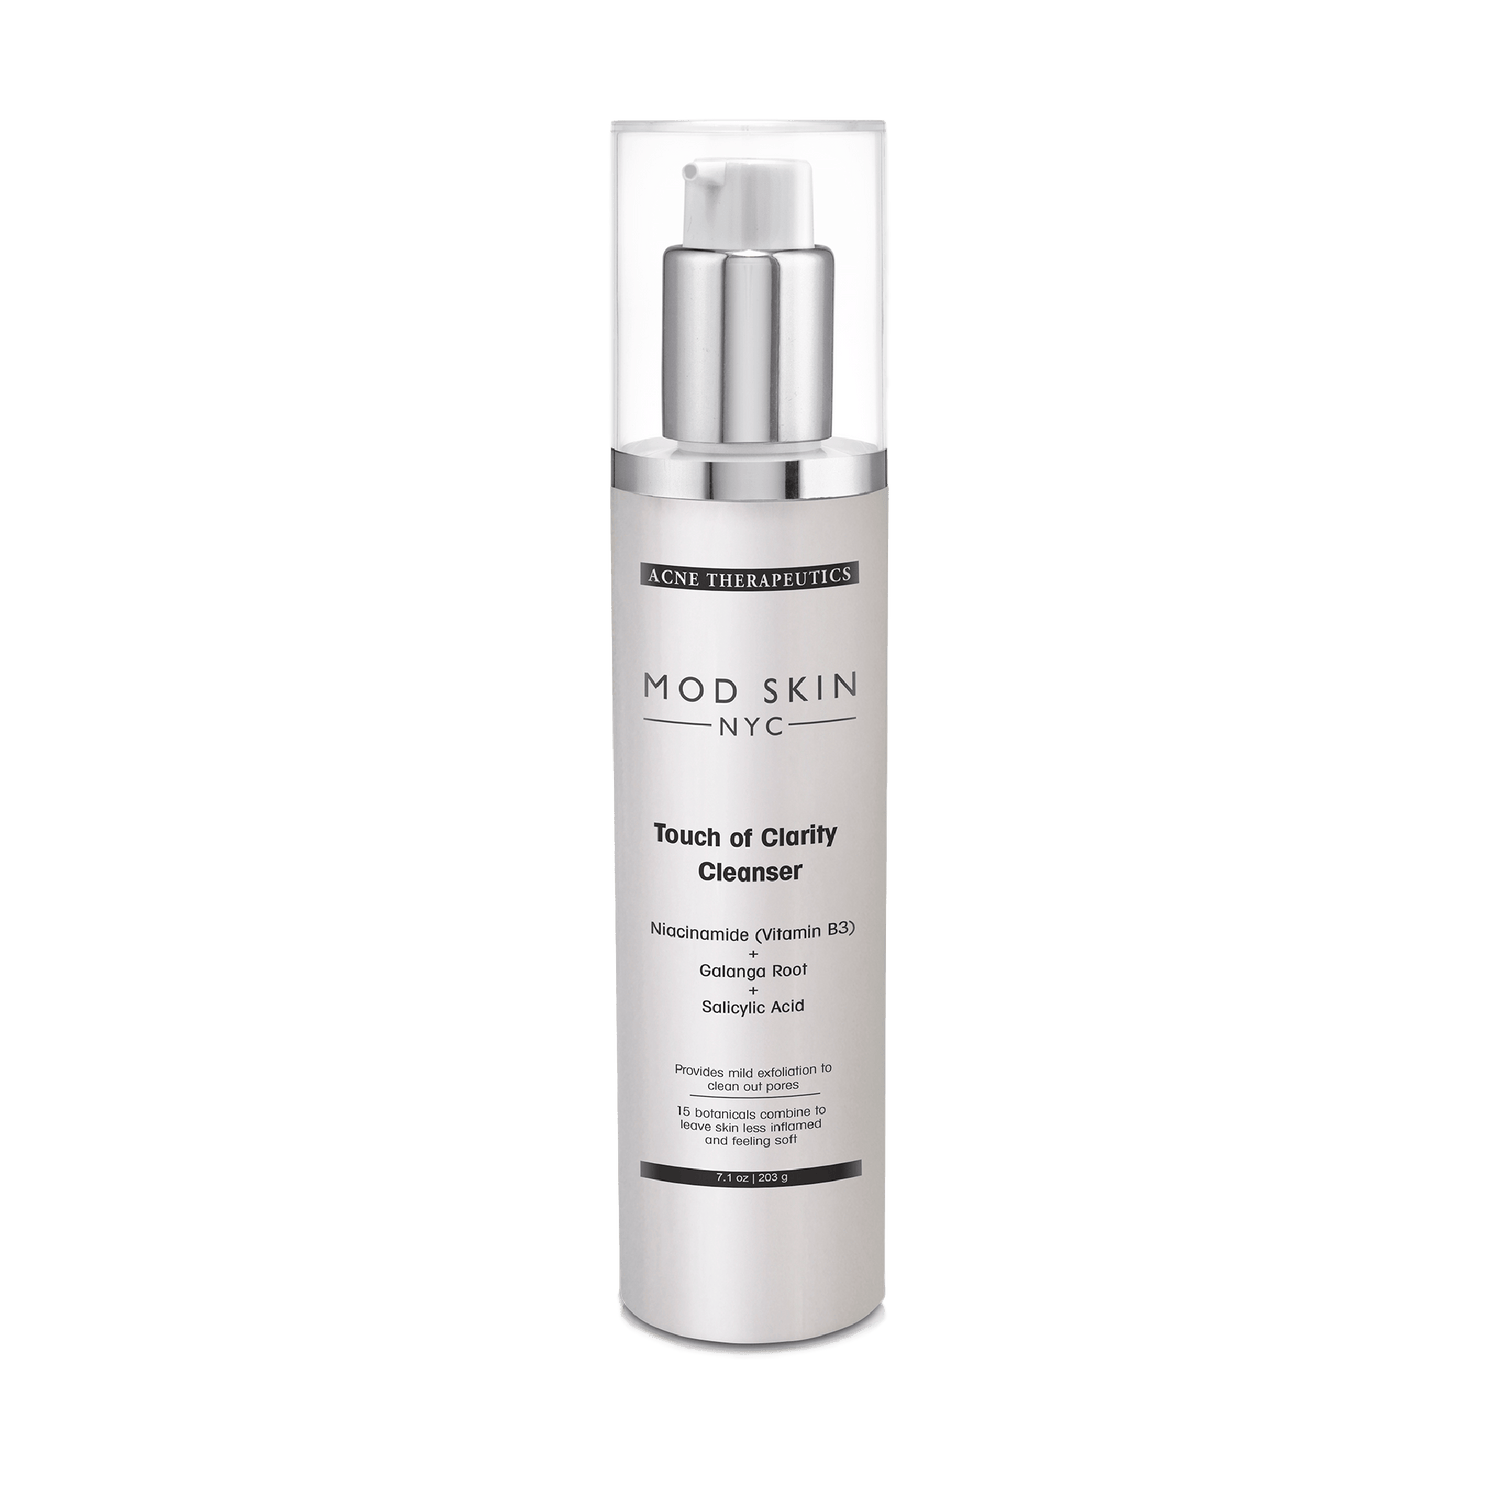 MOD SKIN NYC Touch of Clarity Cleanser (203 g / 7.1 oz) - The DLG Store